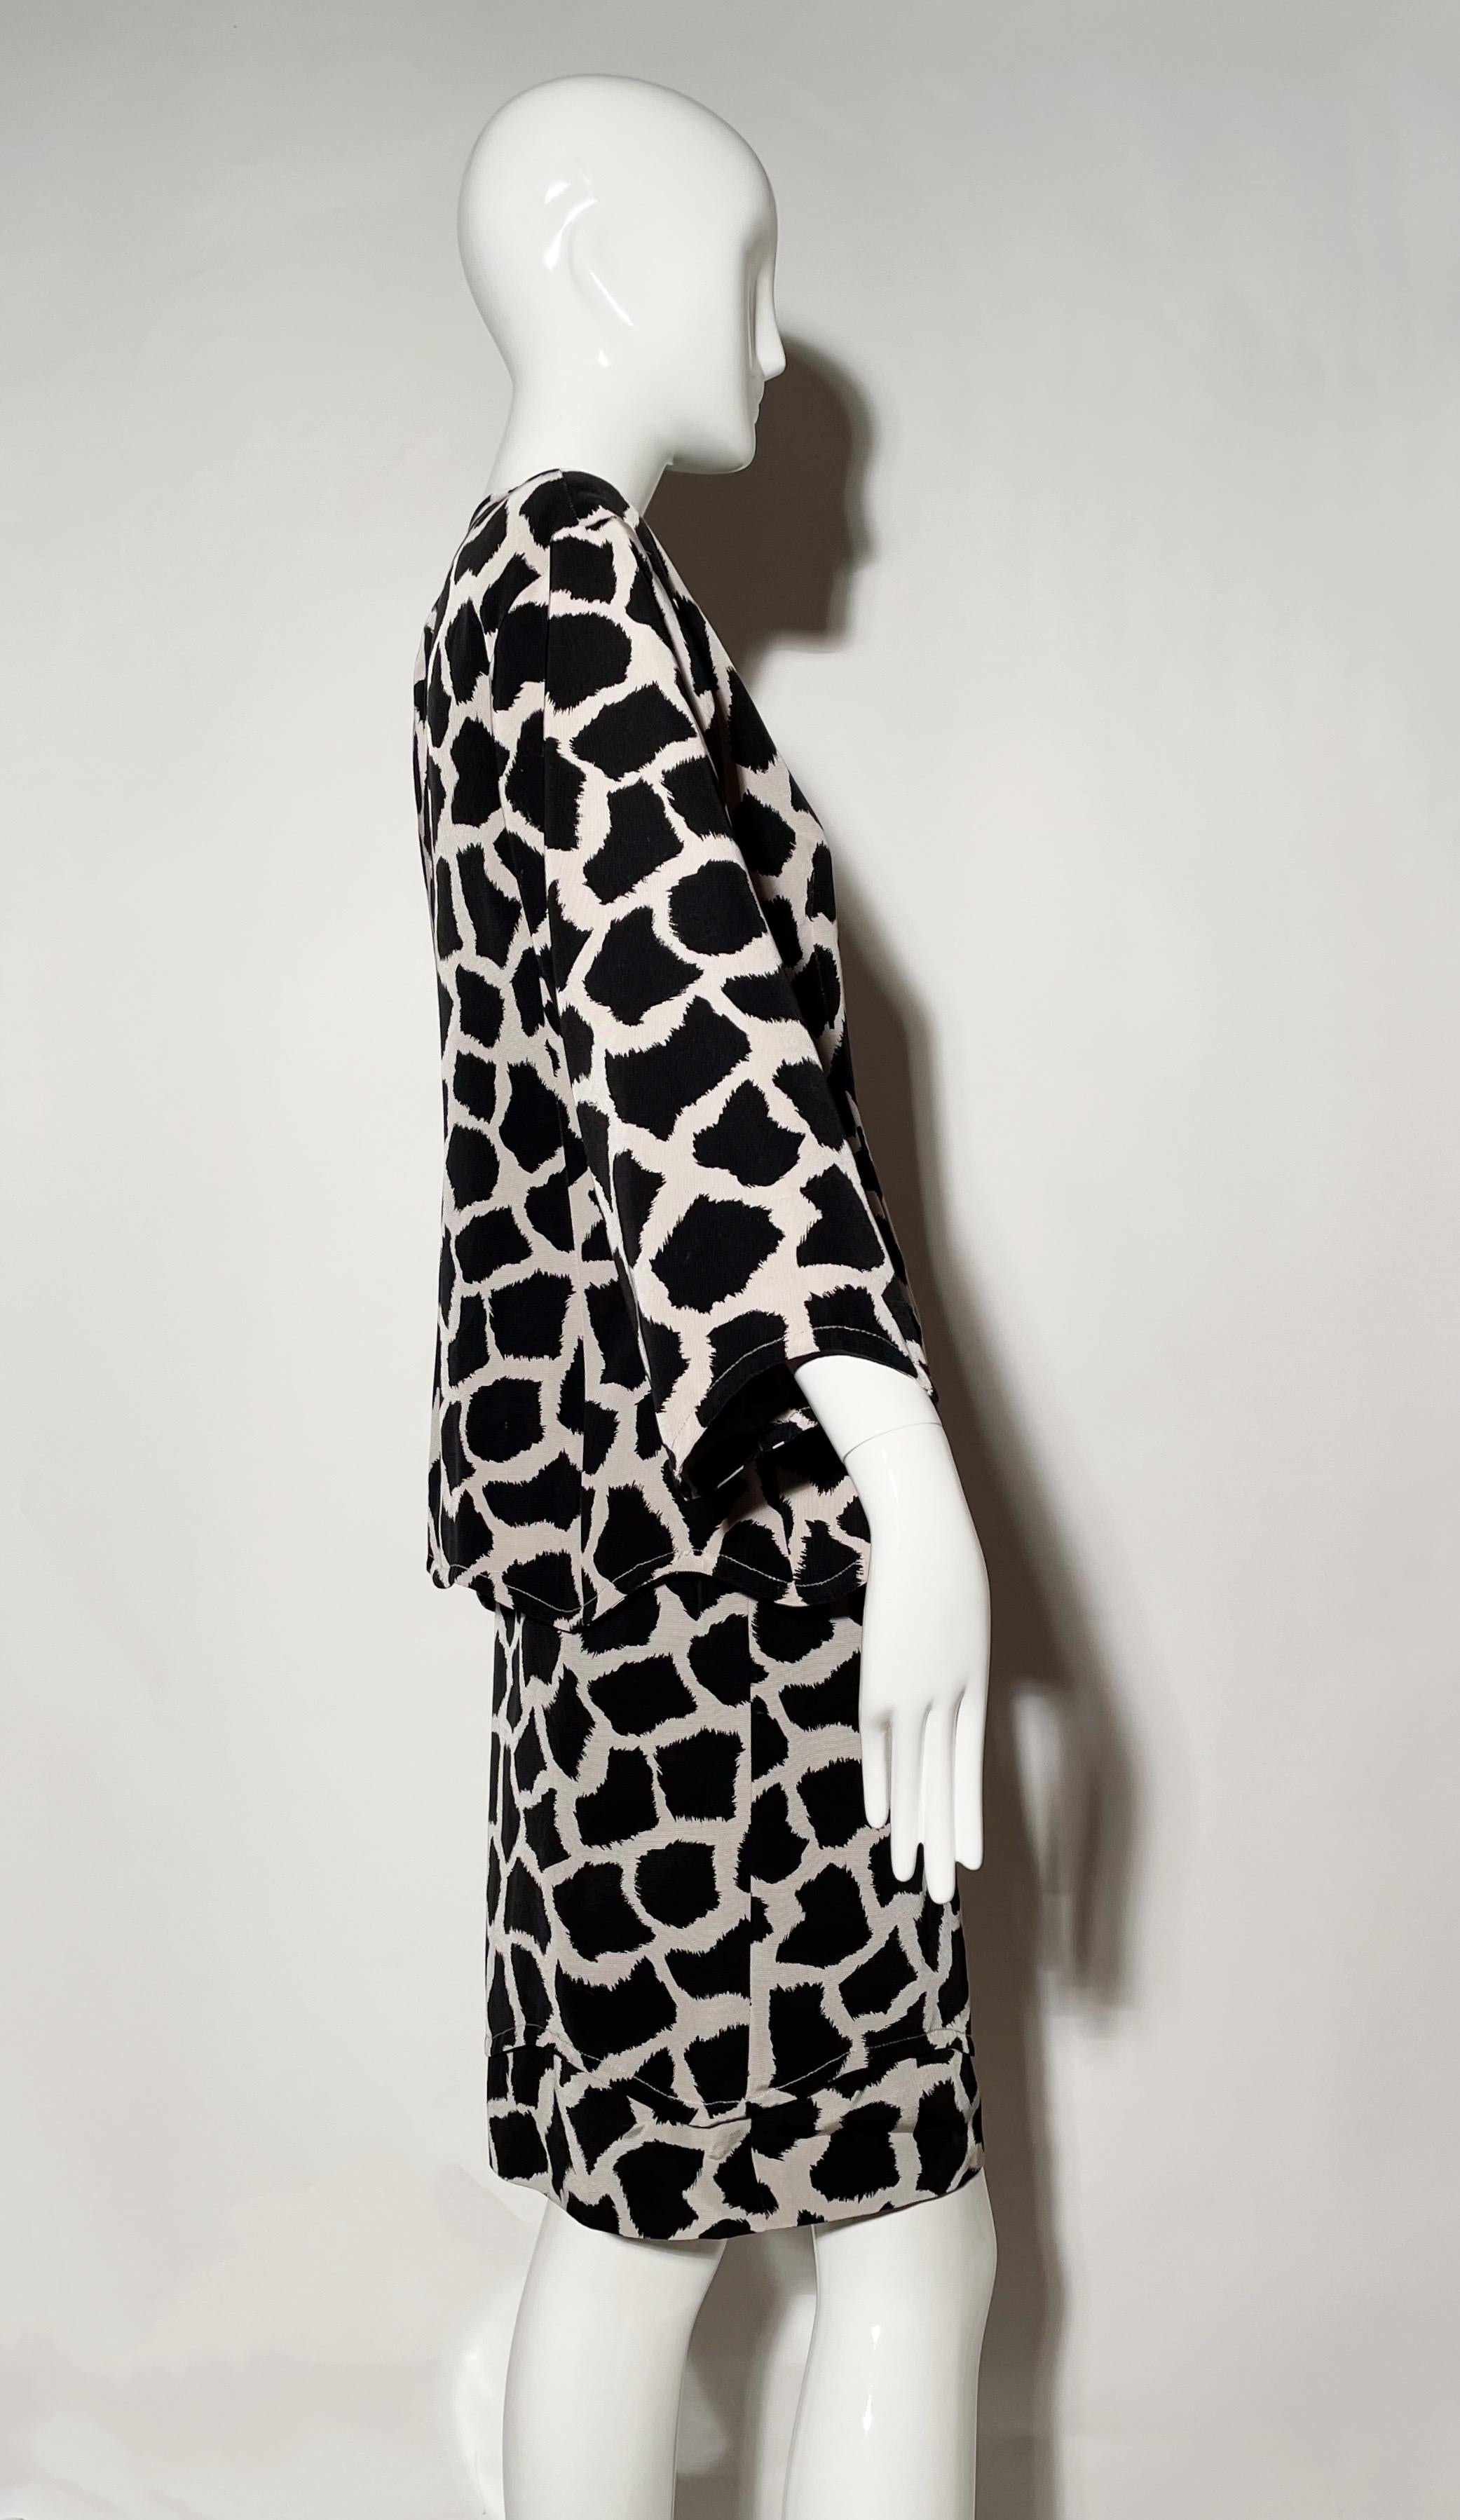 Jean Muir Giraffe Print Skirt Suit In Excellent Condition For Sale In Los Angeles, CA